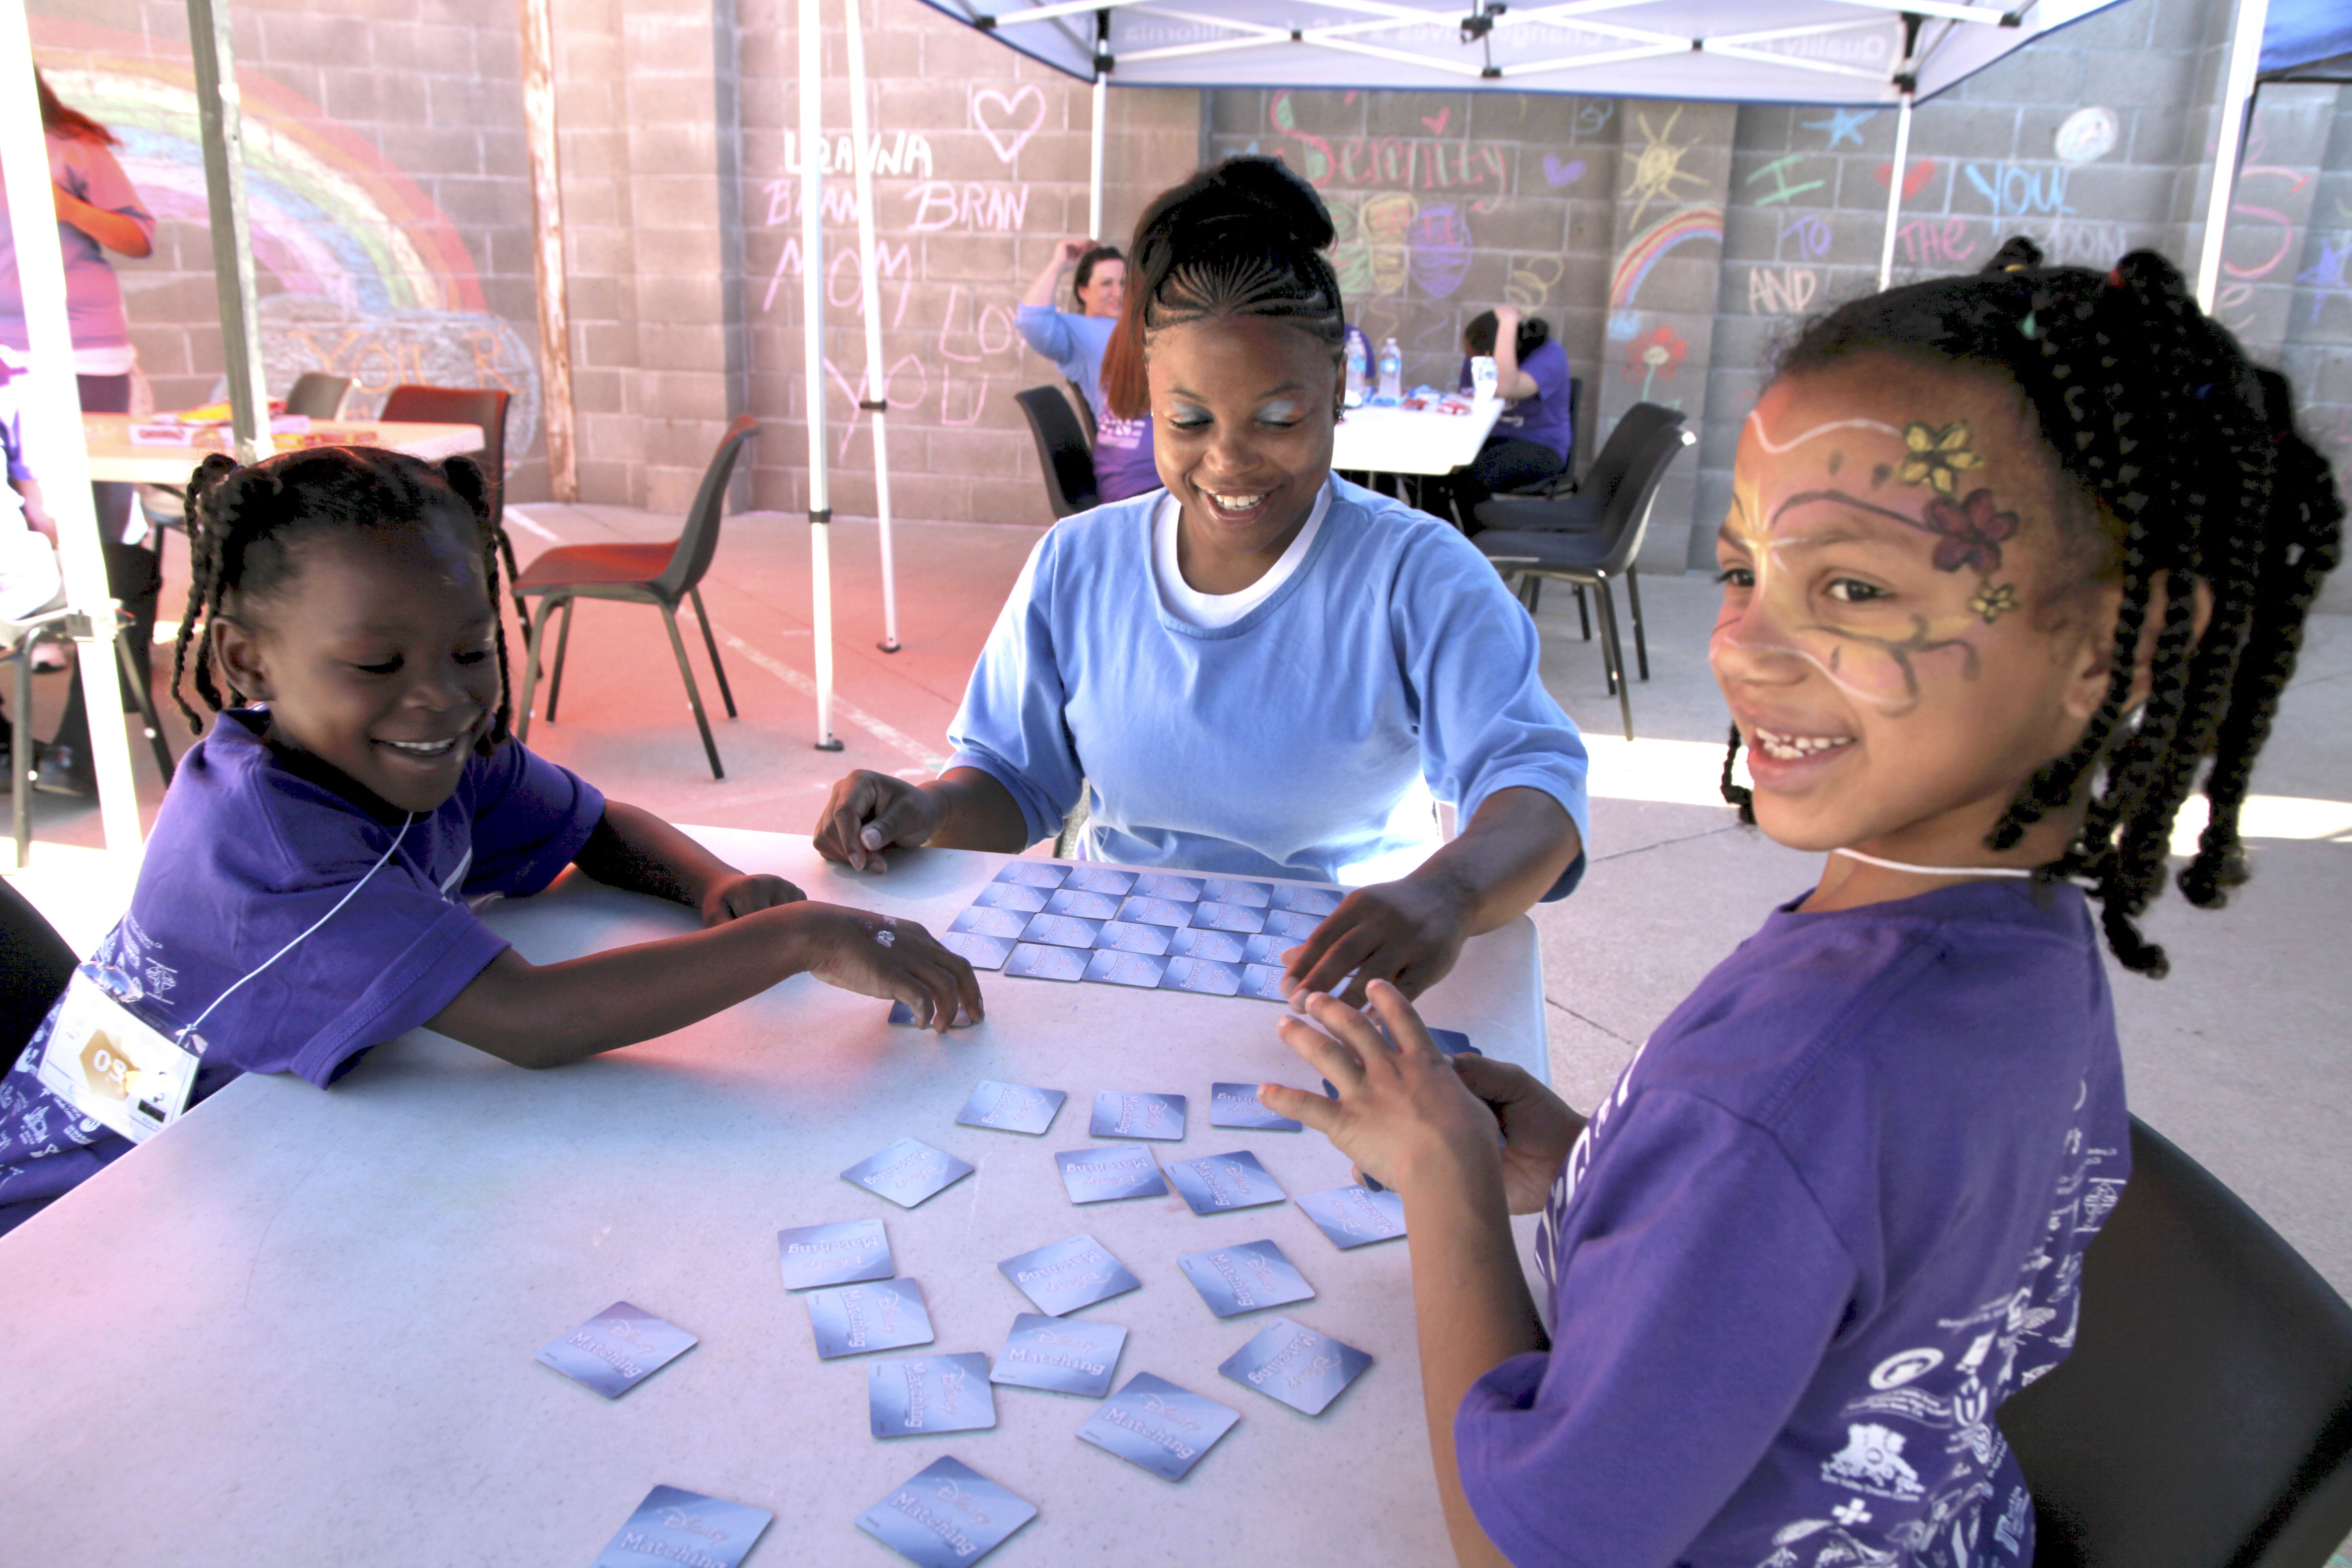 ALL SMILES Mi'Angel (left) and Mayal enjoy a card game with their mom, Donisha. Image by Jaime Joyce. United States, 2018.